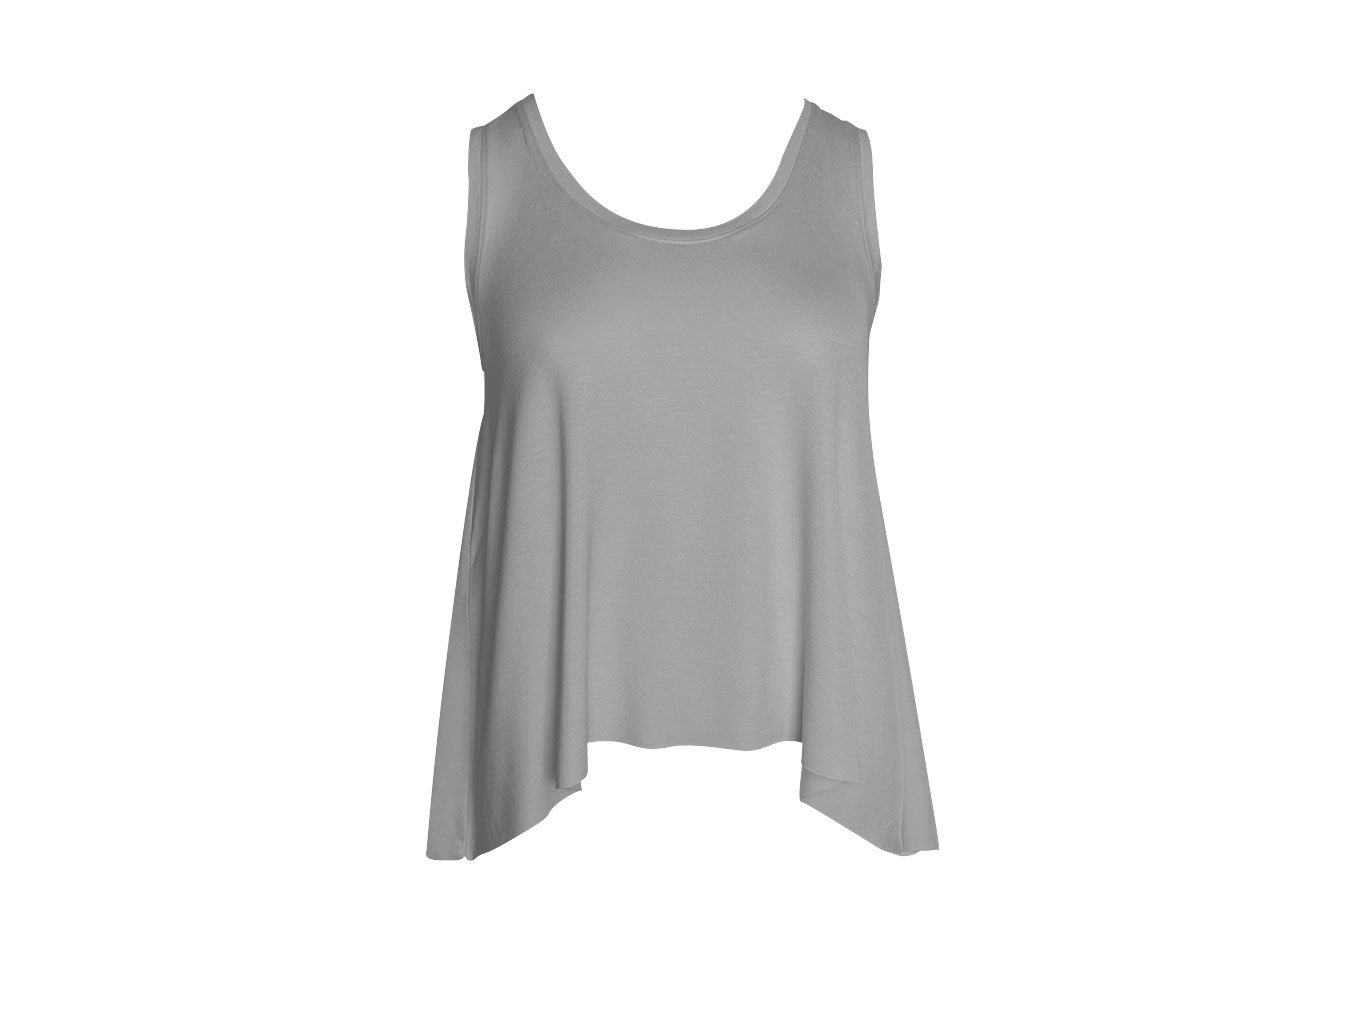 Grey Tank Top - Ripped Cotton